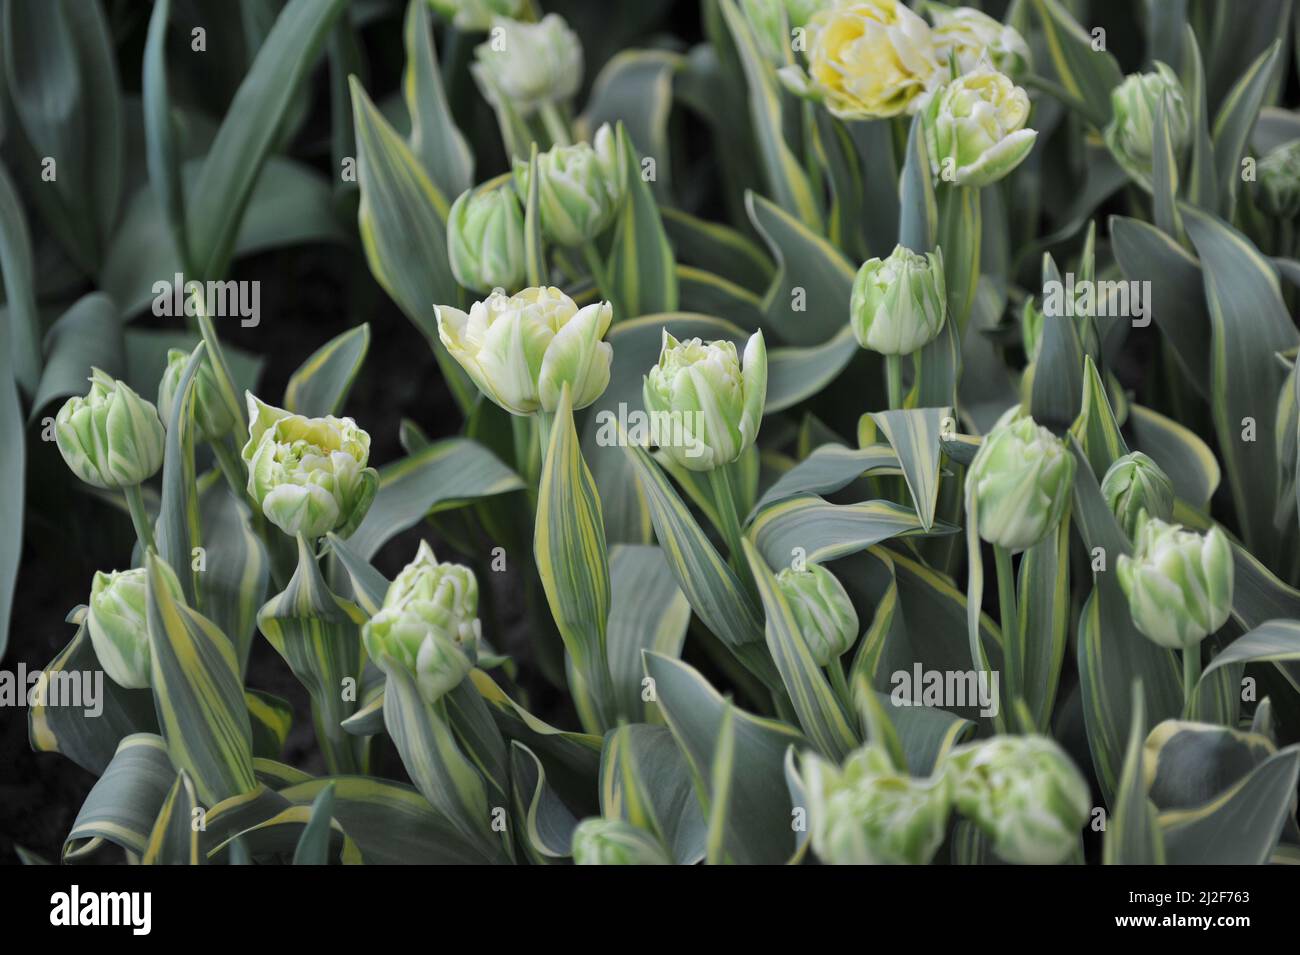 Creamy white peony-flowered Double Early tulips (Tulipa) Verona Design with variegated leaves bloom in a garden in March Stock Photo